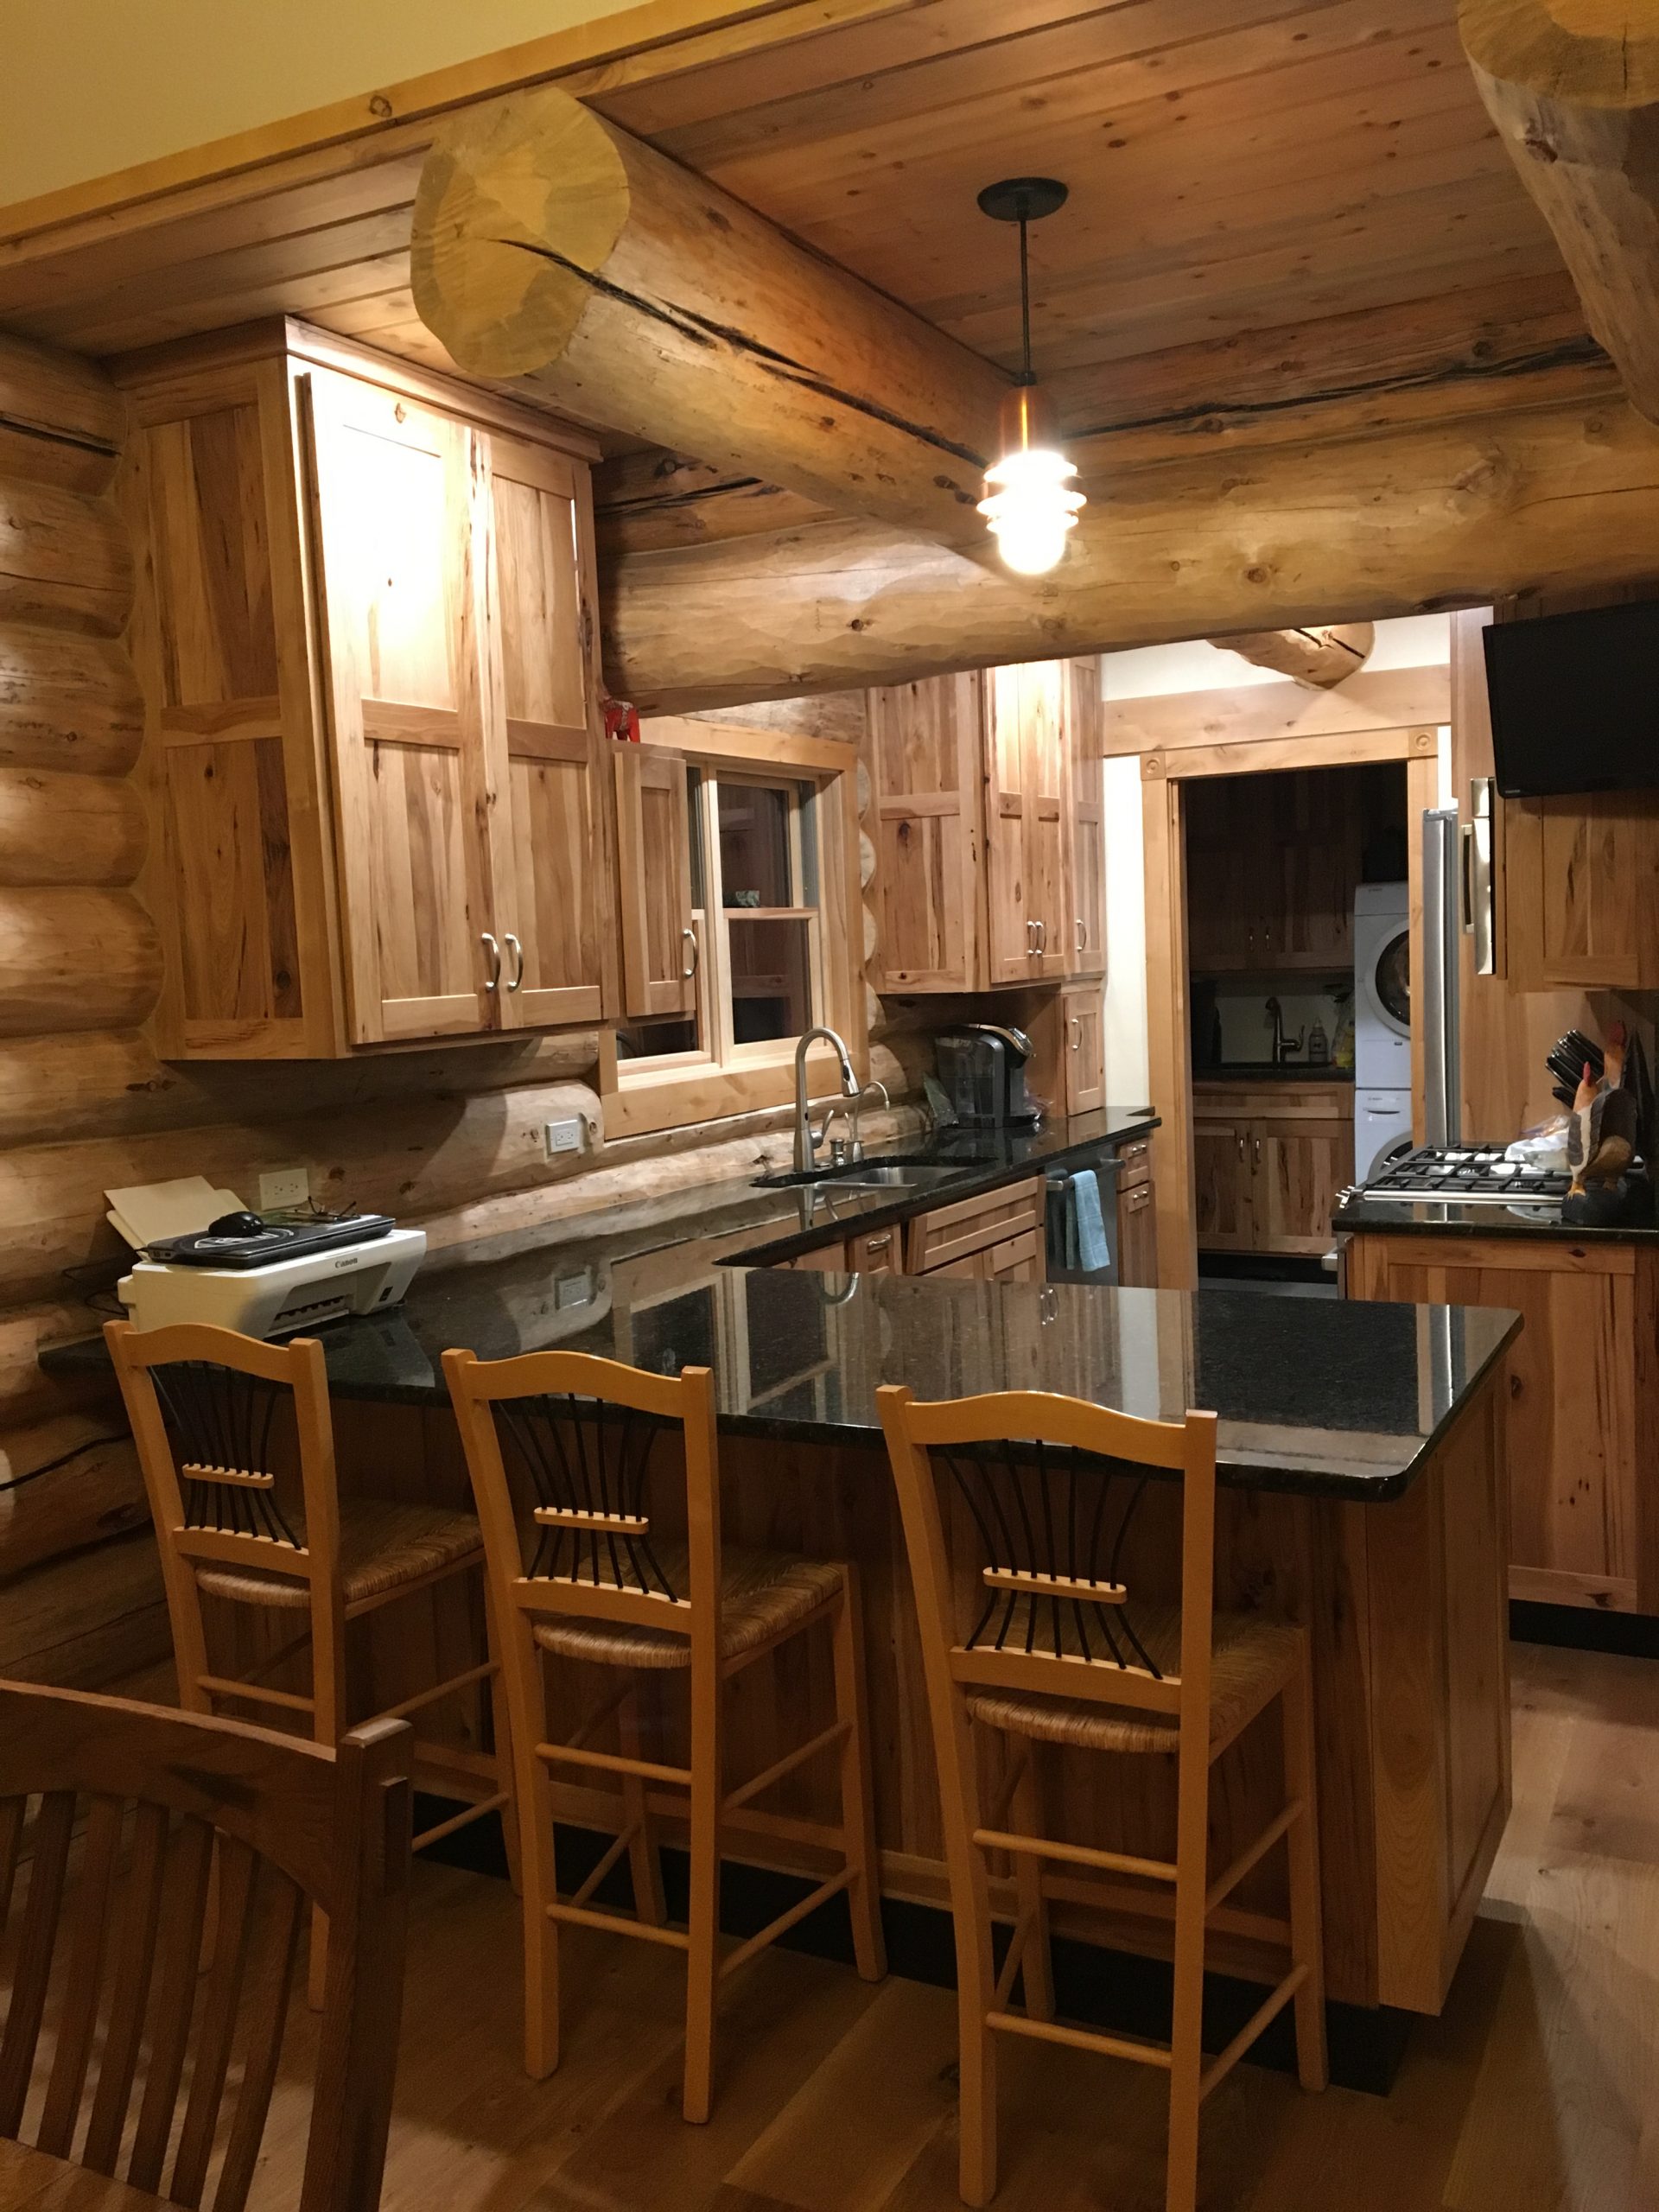 A small but efficient kitchen has custom cabinets and granite counter tops in this log home.